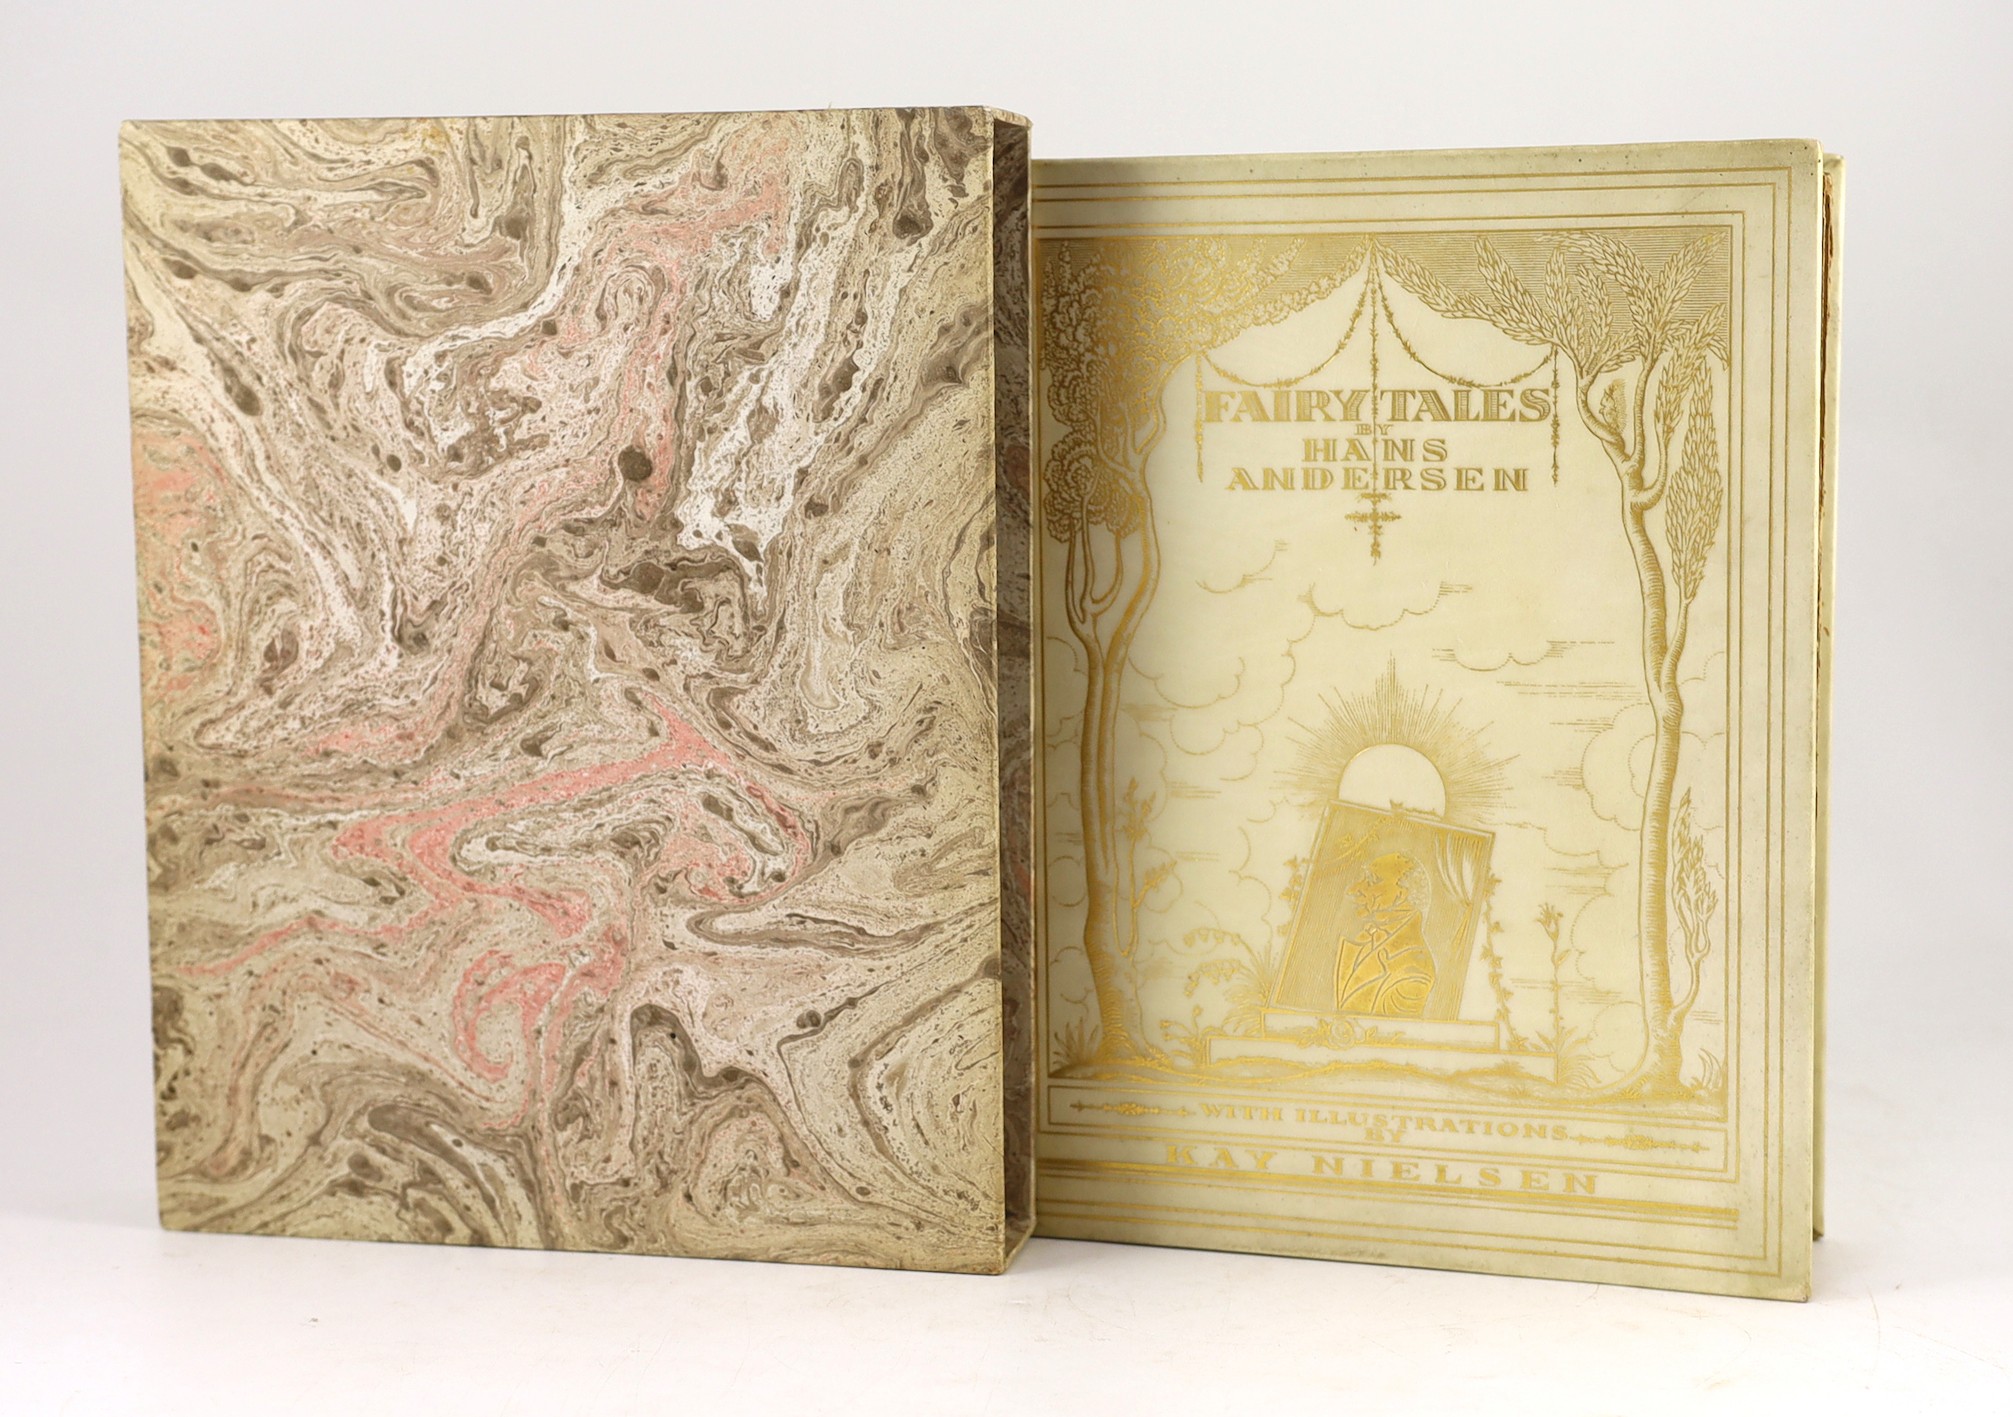 Andersen, Hans Christian - Fairy Tales ... Illustrated by Kay Nielsen. Limited edition of 500 numbered copies, signed by the artist. 12 coloured and mounted plates with captioned guards, text illus. (some full page) and